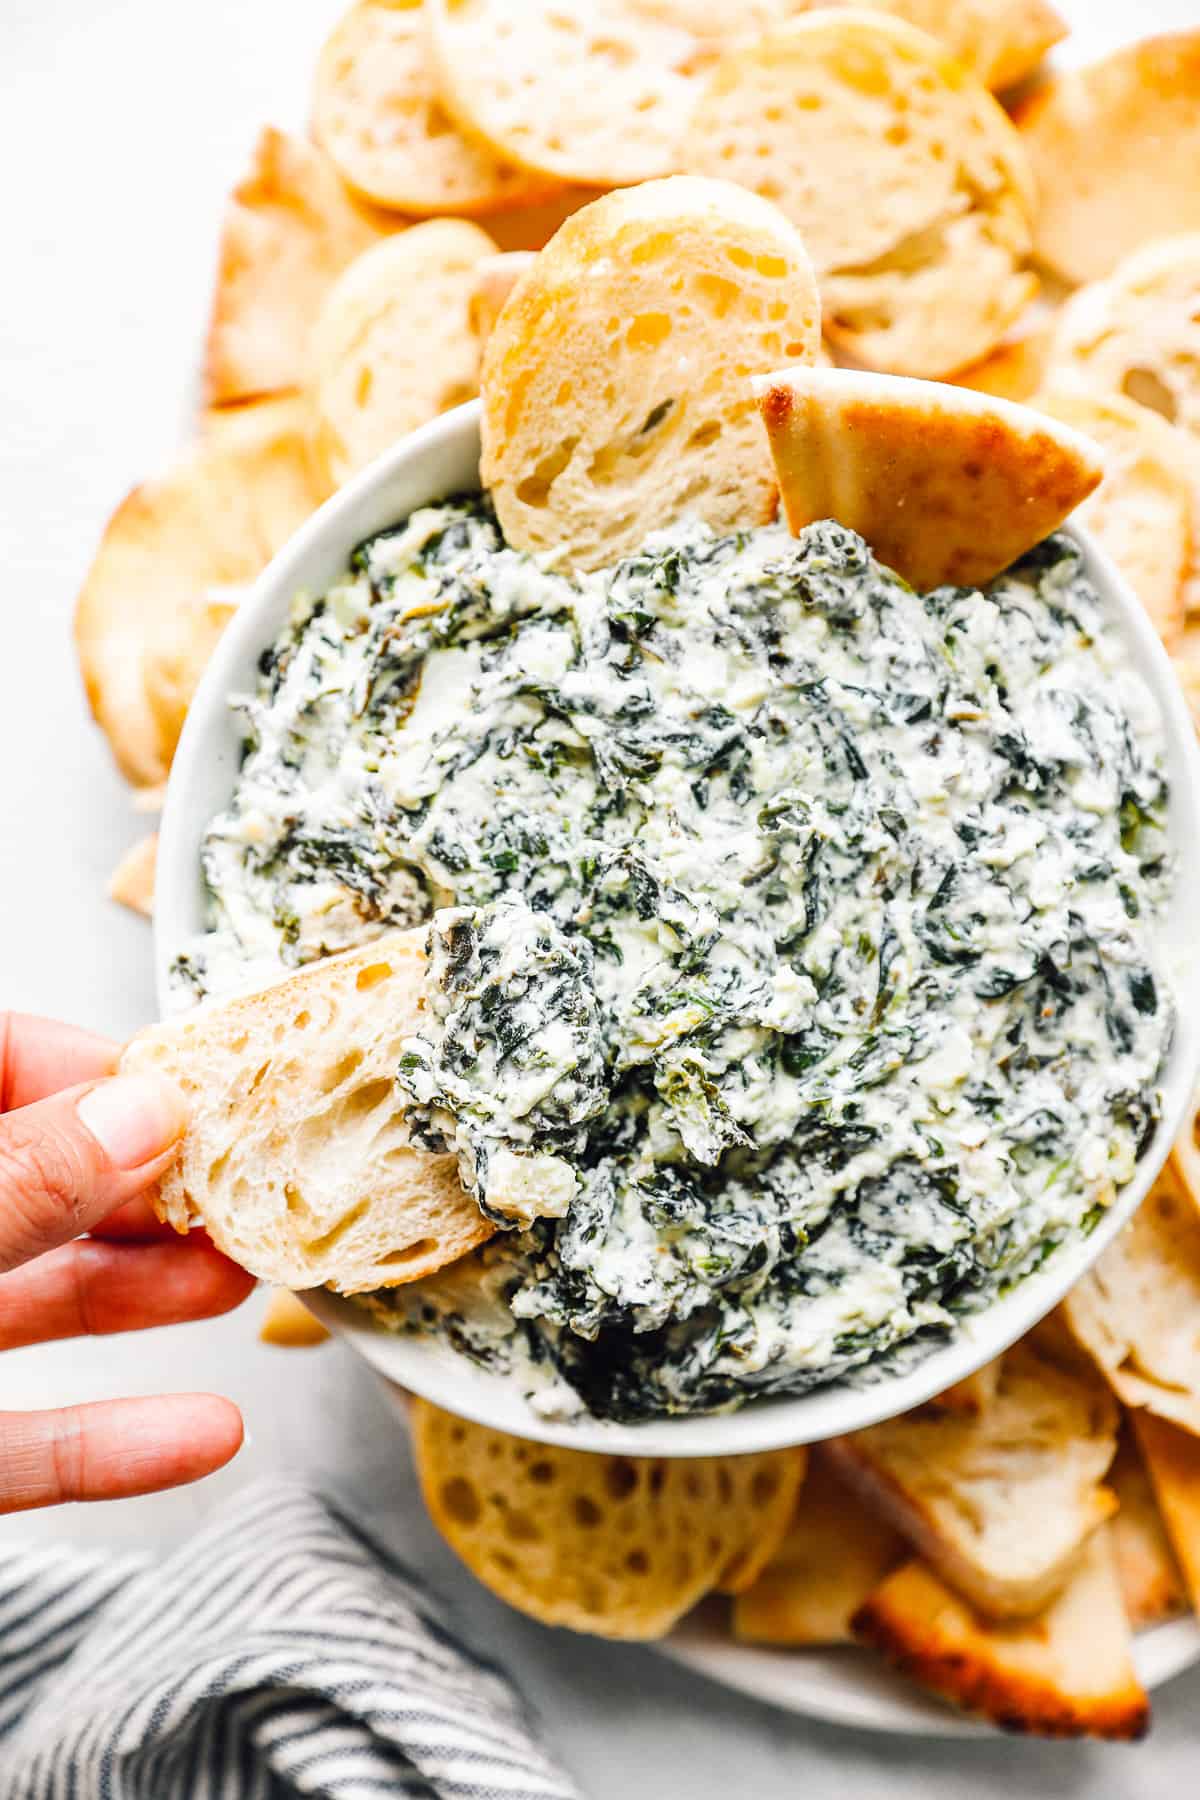 Crockpot Spinach Dip {Healthy Spinach Dip} - The Cookie Rookie (VIDEO)